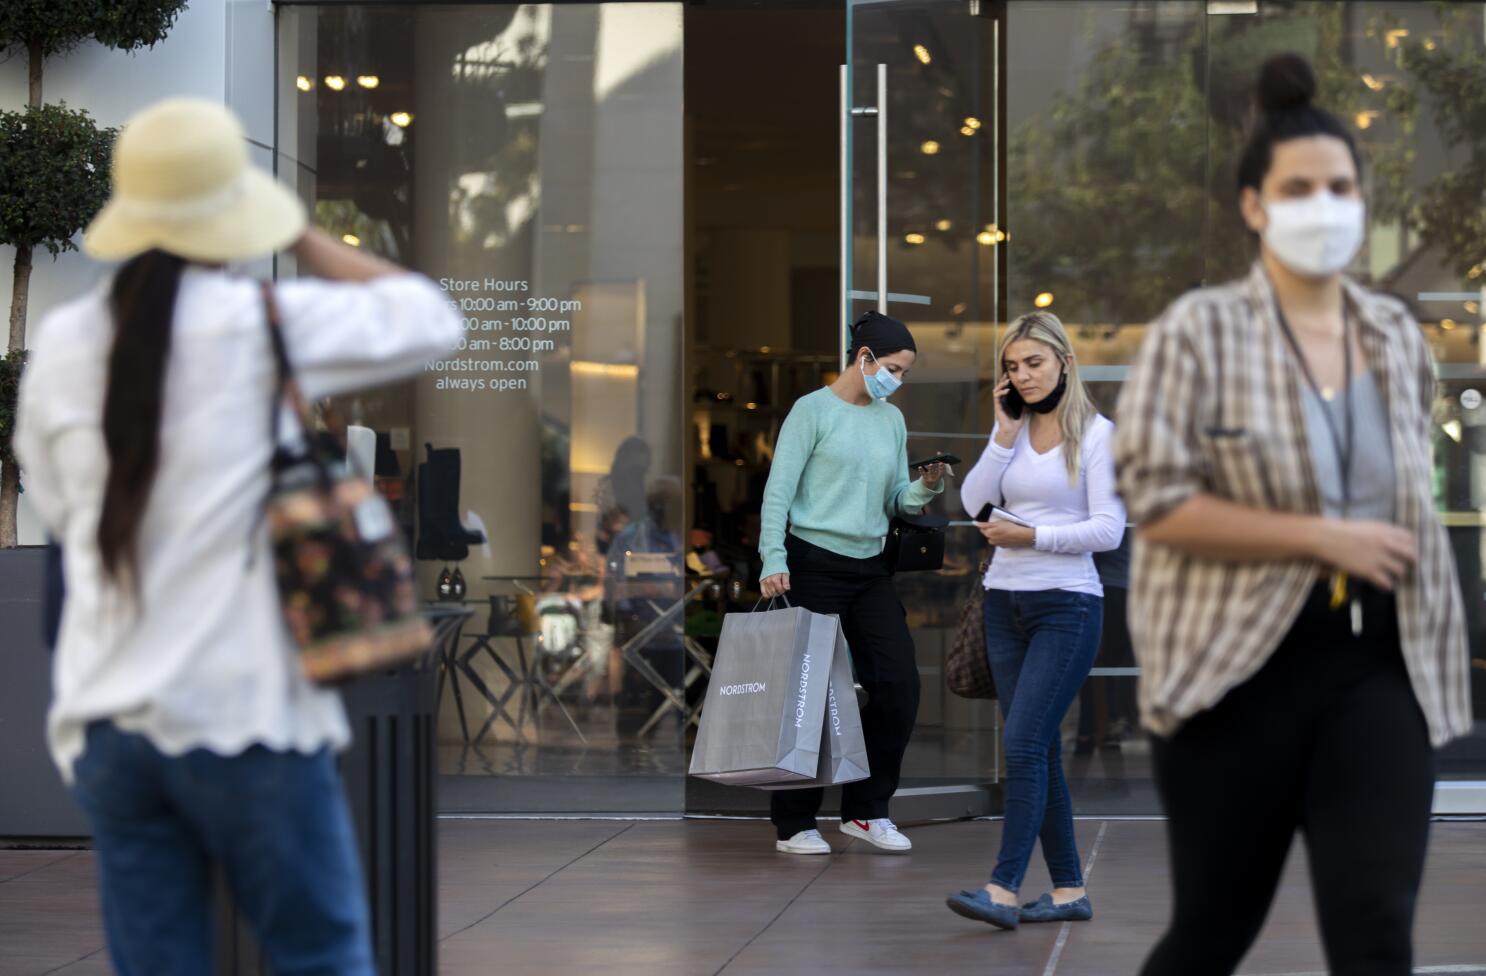 LA luxury mall latest to be hit by smash-and-grab thieves